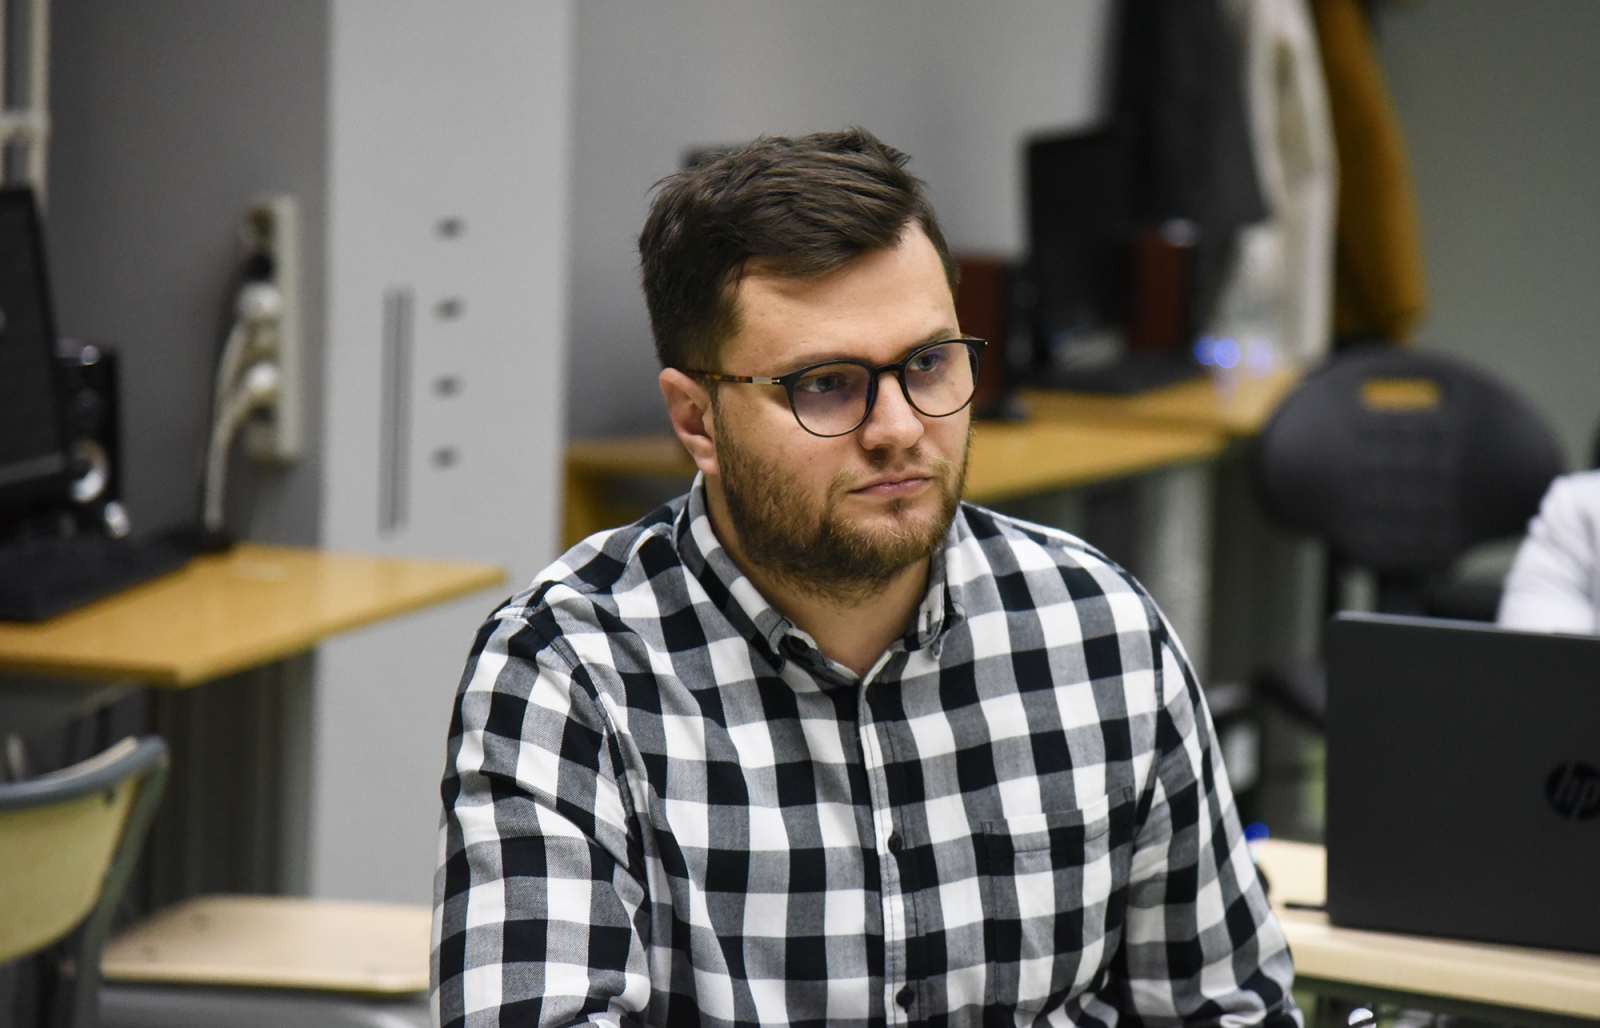 Prominent UX/UI designer Amir Kadić holds a guest lecture at IUS